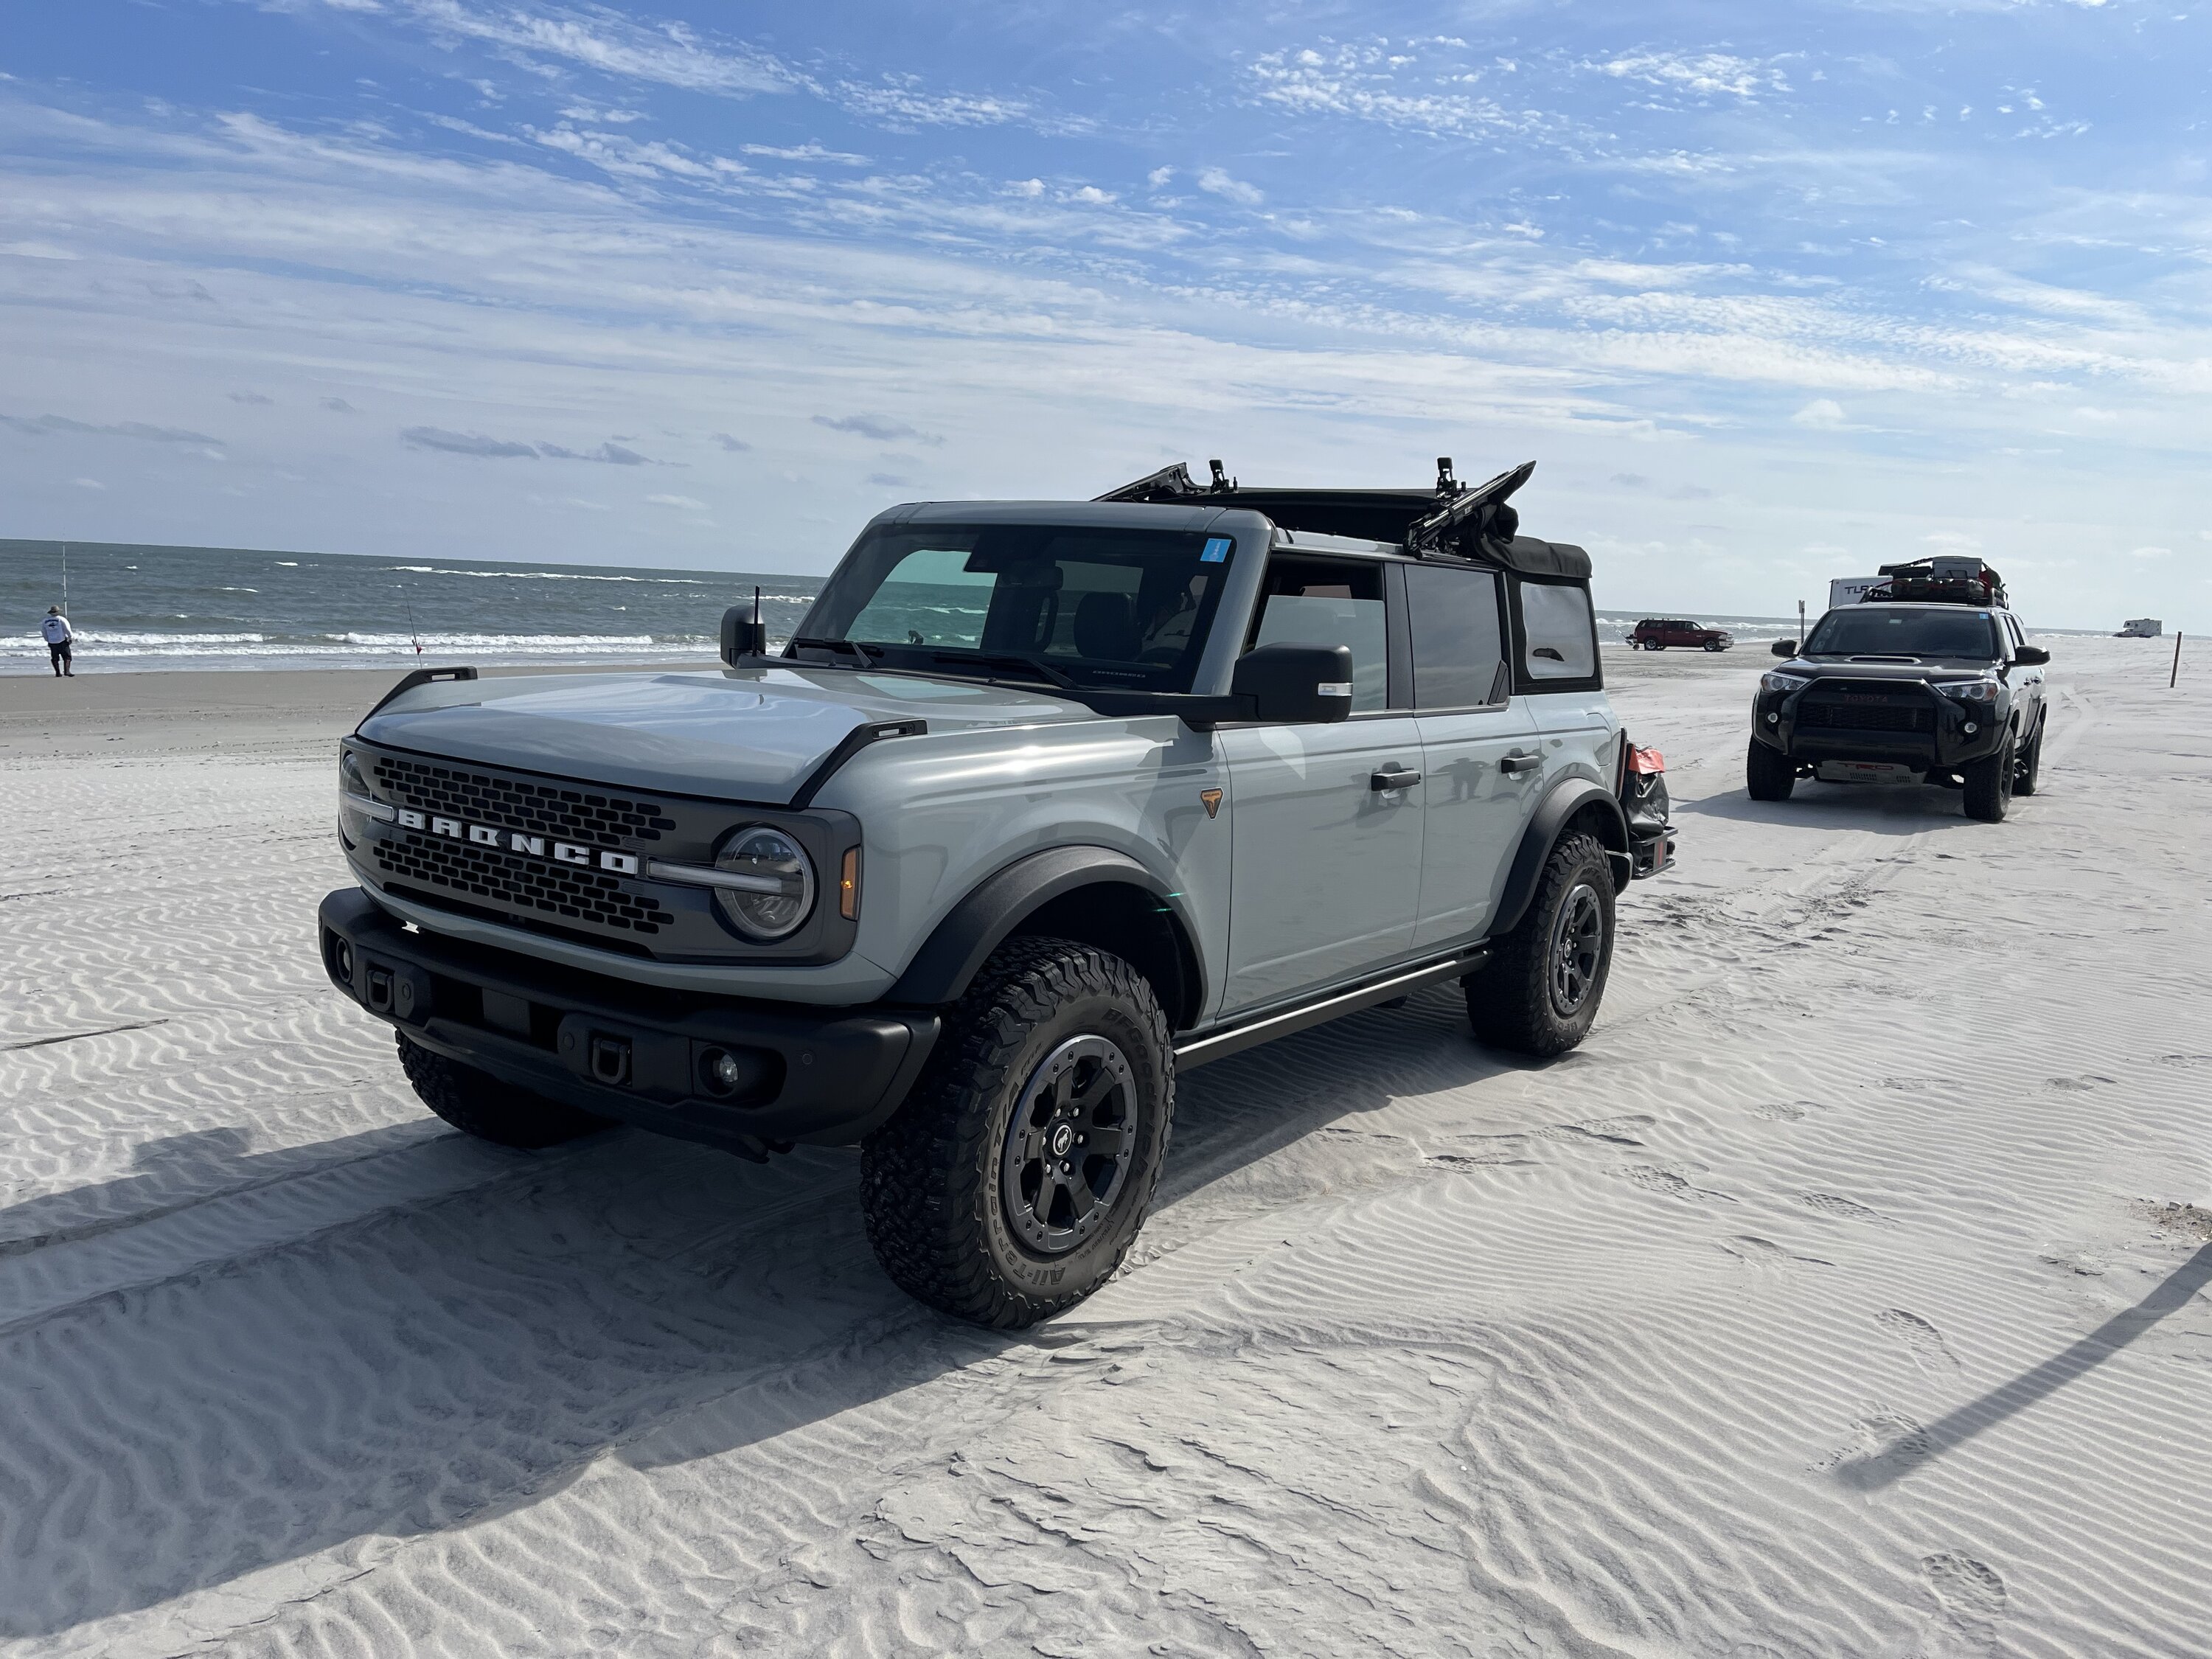 Ford Bronco Beach Builds / Surf Fishing Builds ready for the summer? Post yours! IMG_0405